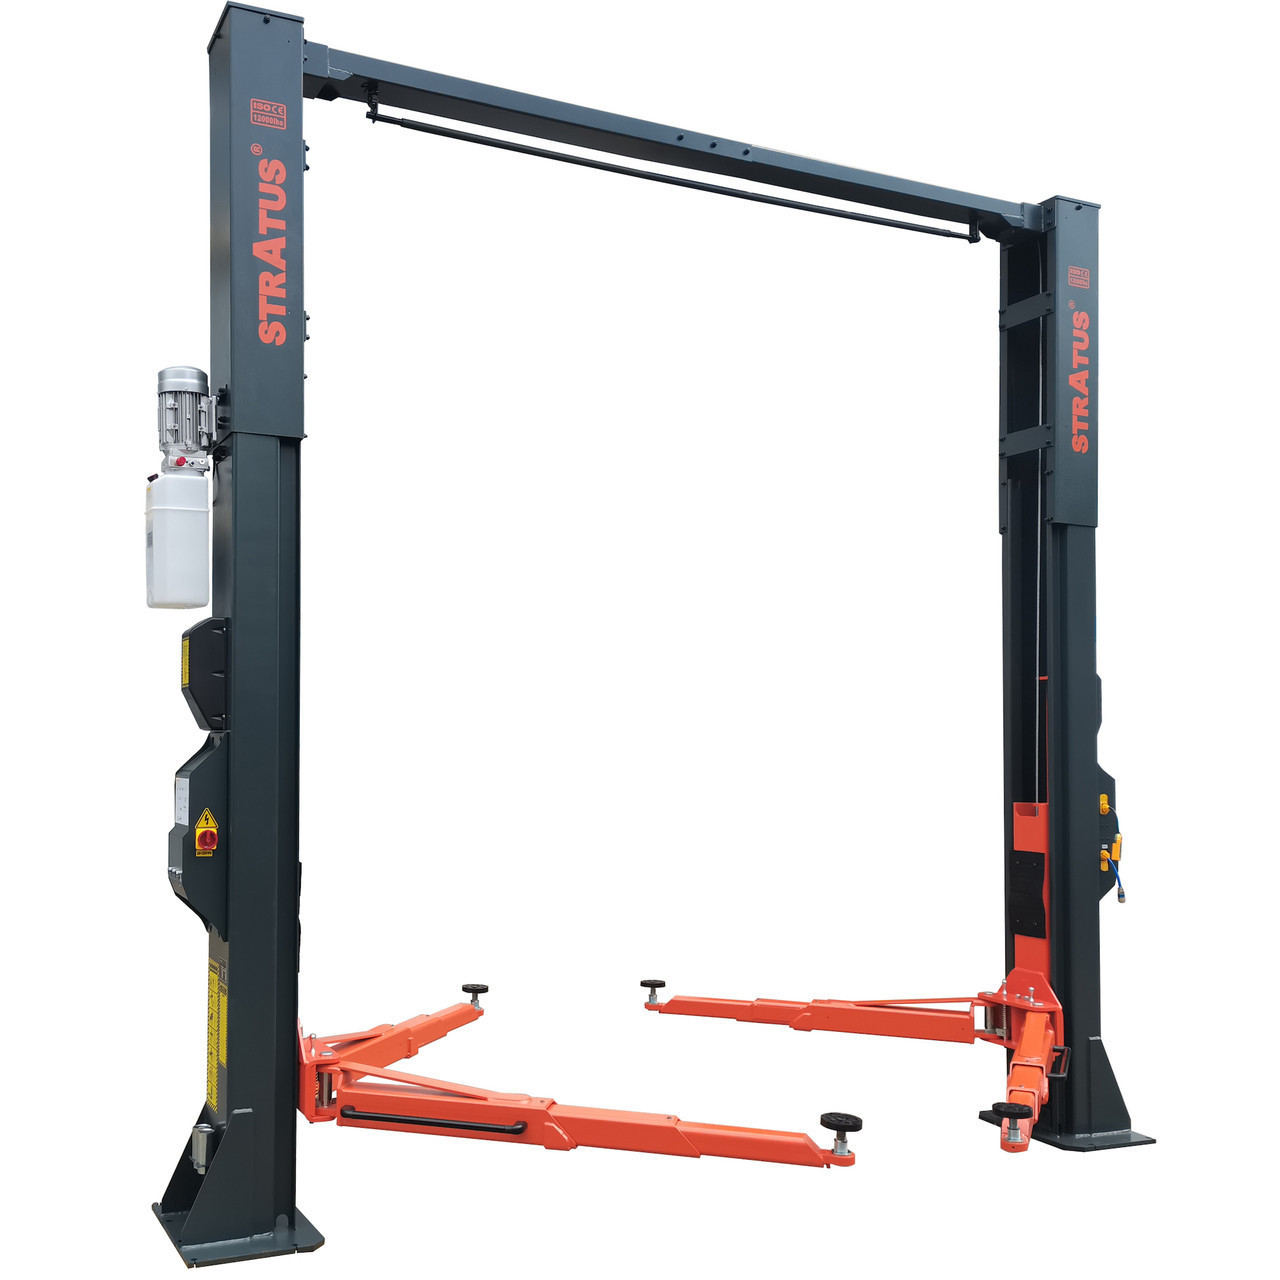 This two-post clear floor car hoist comes with electric safety lock release design, easy to operate and maintain. It is suitable to hold 12,000 lbs. or less, ideally for inspection, repair and maintenance of various types of vehicles.